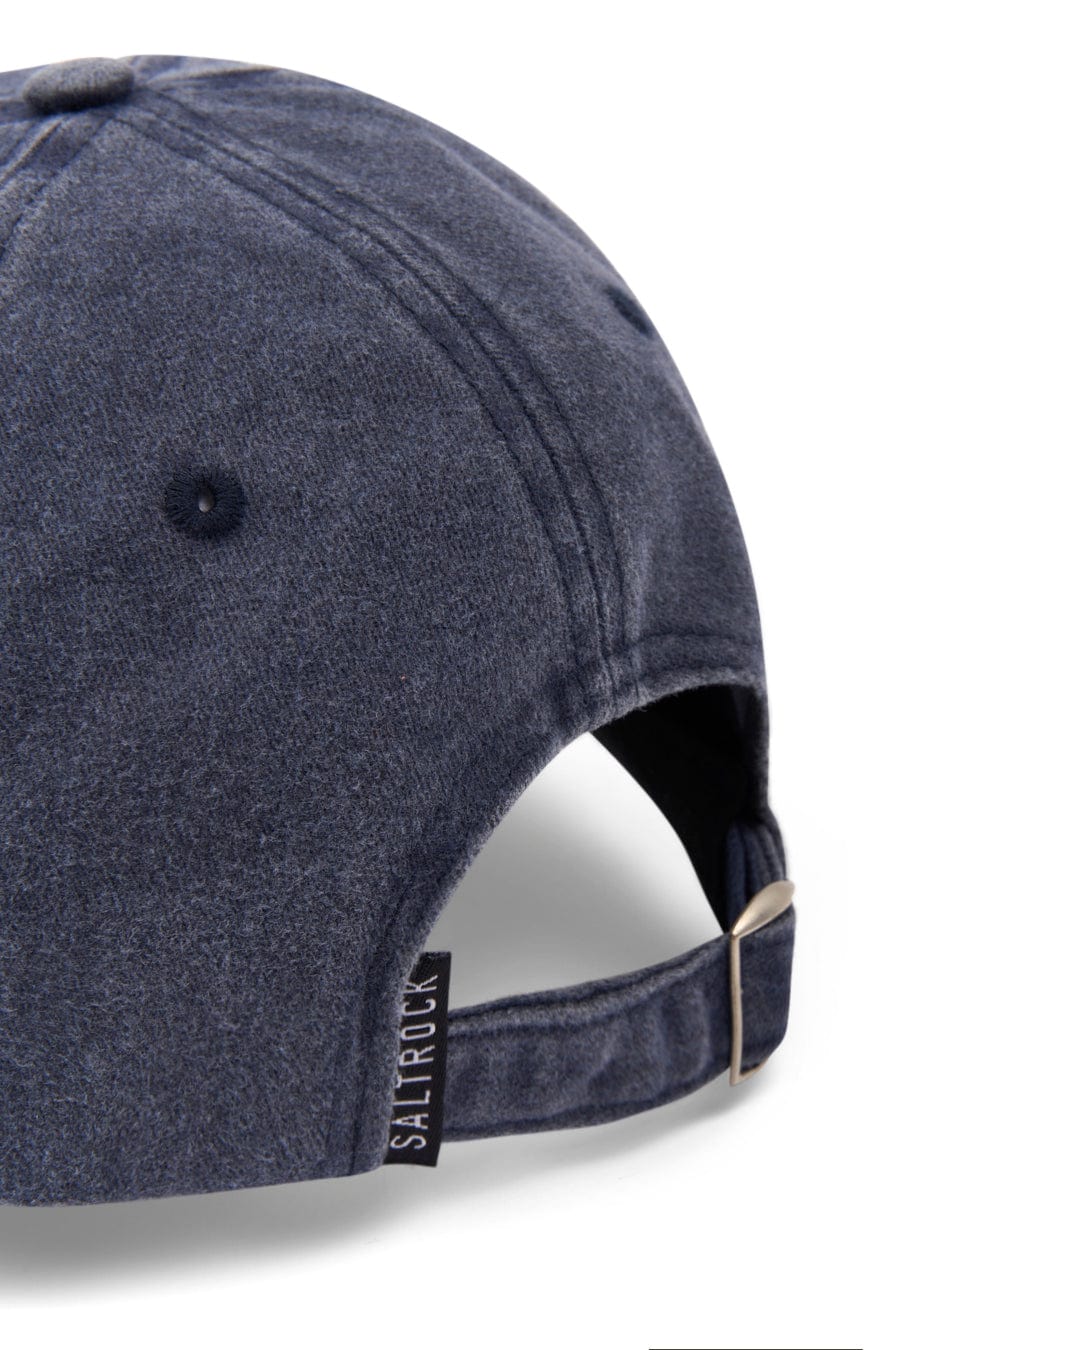 Close-up of a dark blue SR Original Cap with an adjustable strap, displaying the "Saltrock" brand label.